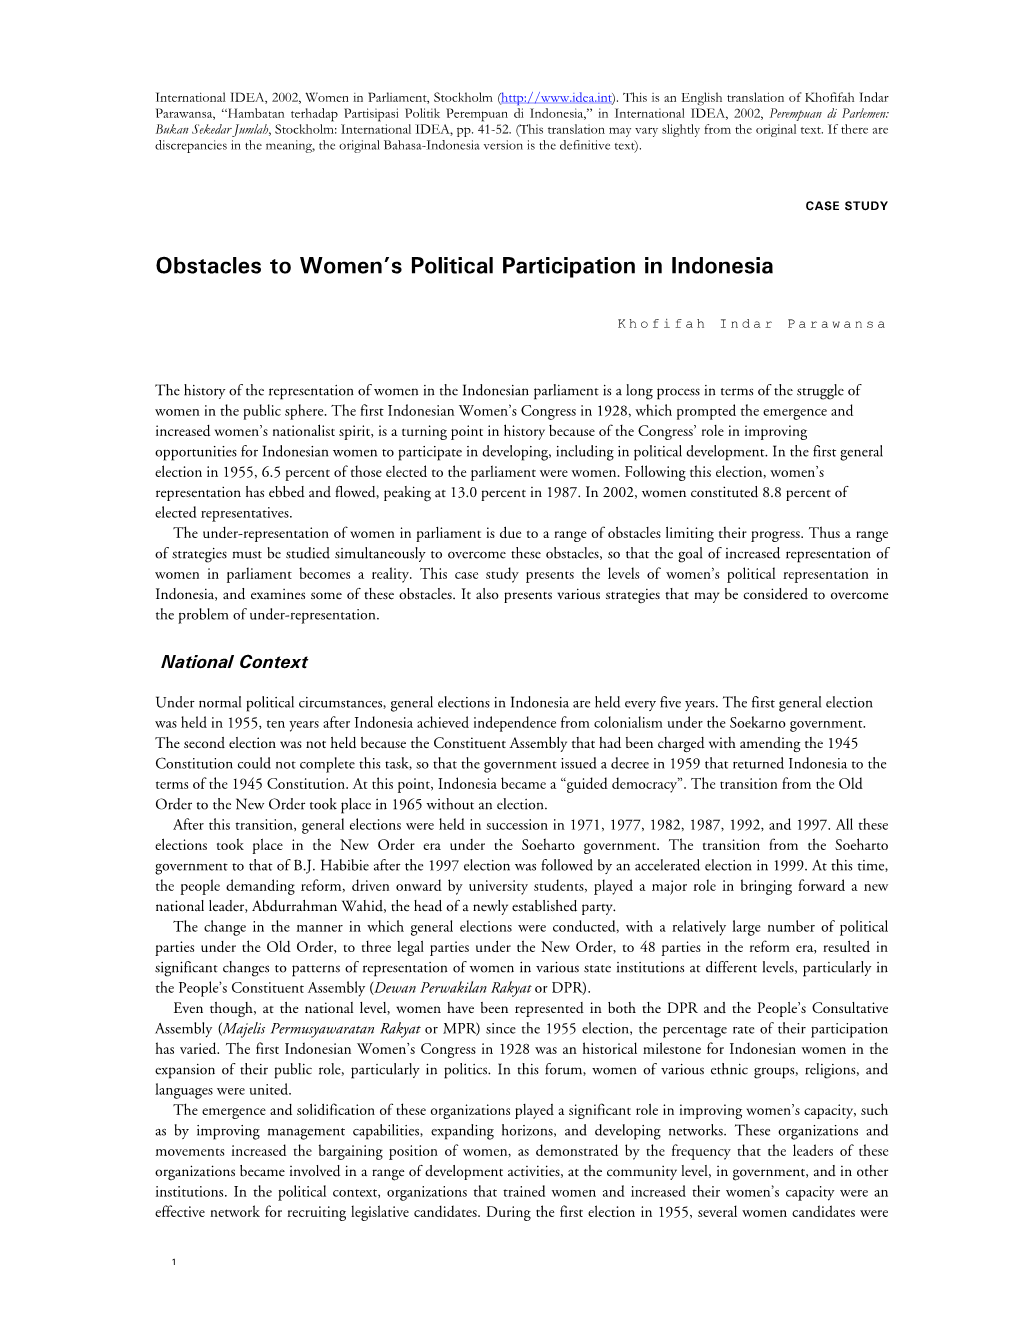 Obstacles to Women's Political Participation in Indonesia